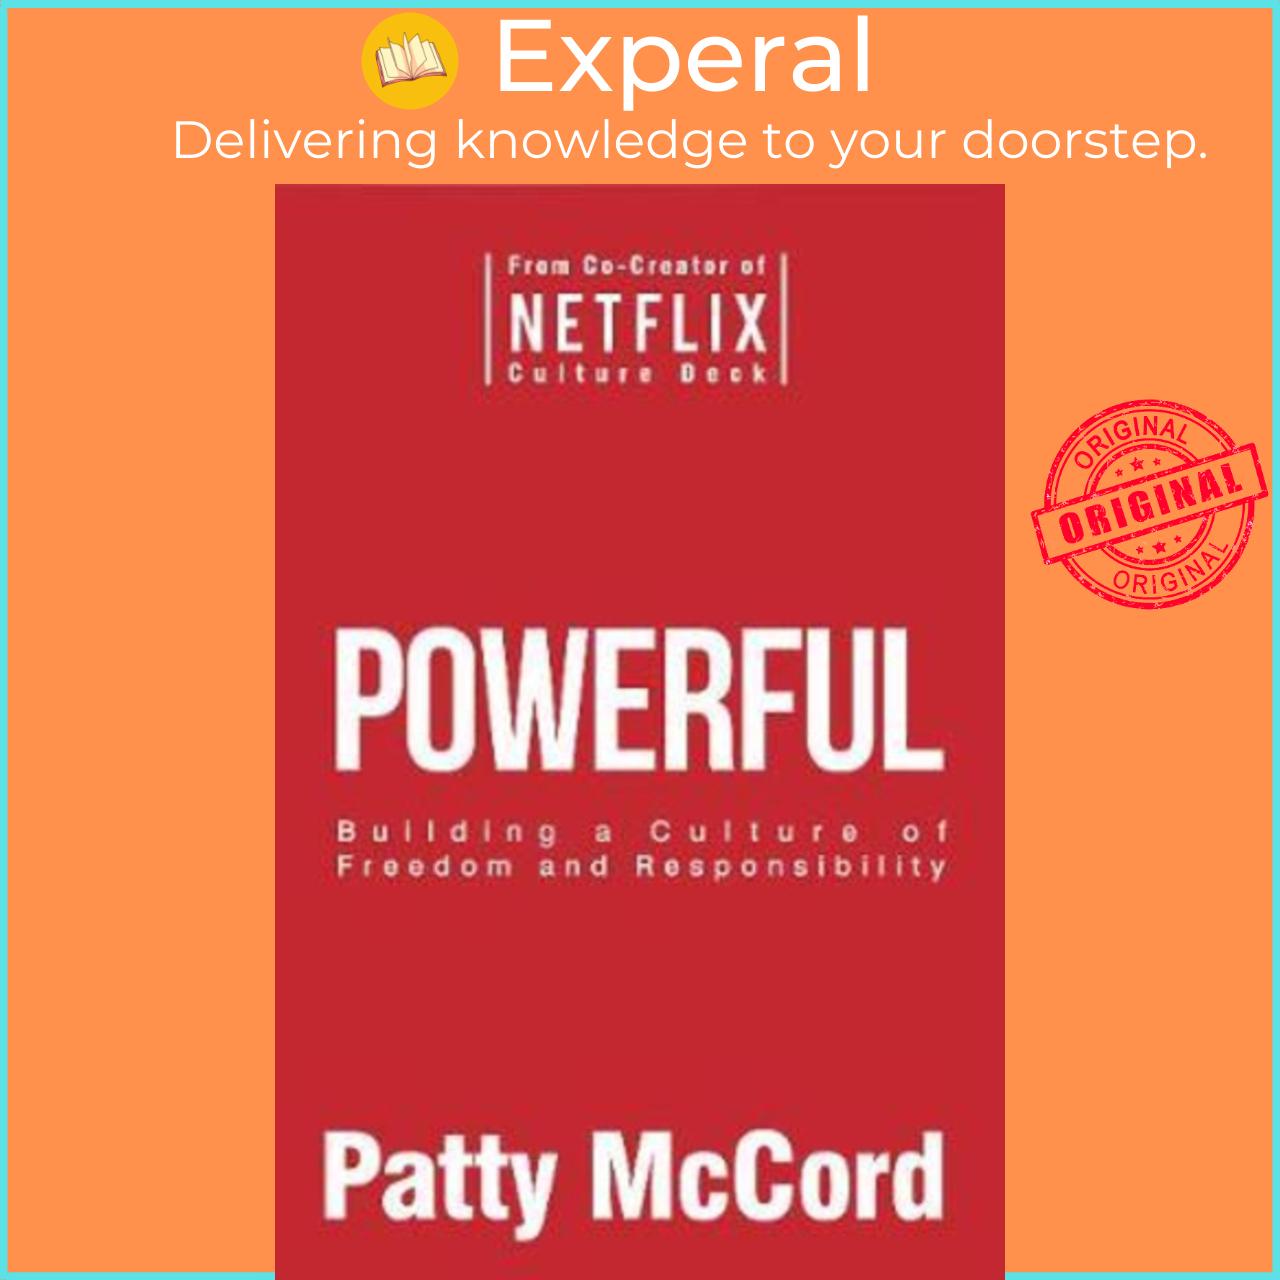 Sách - Powerful : Building a Culture of Freedom and Responsibility by Patty McCord (US edition, paperback)